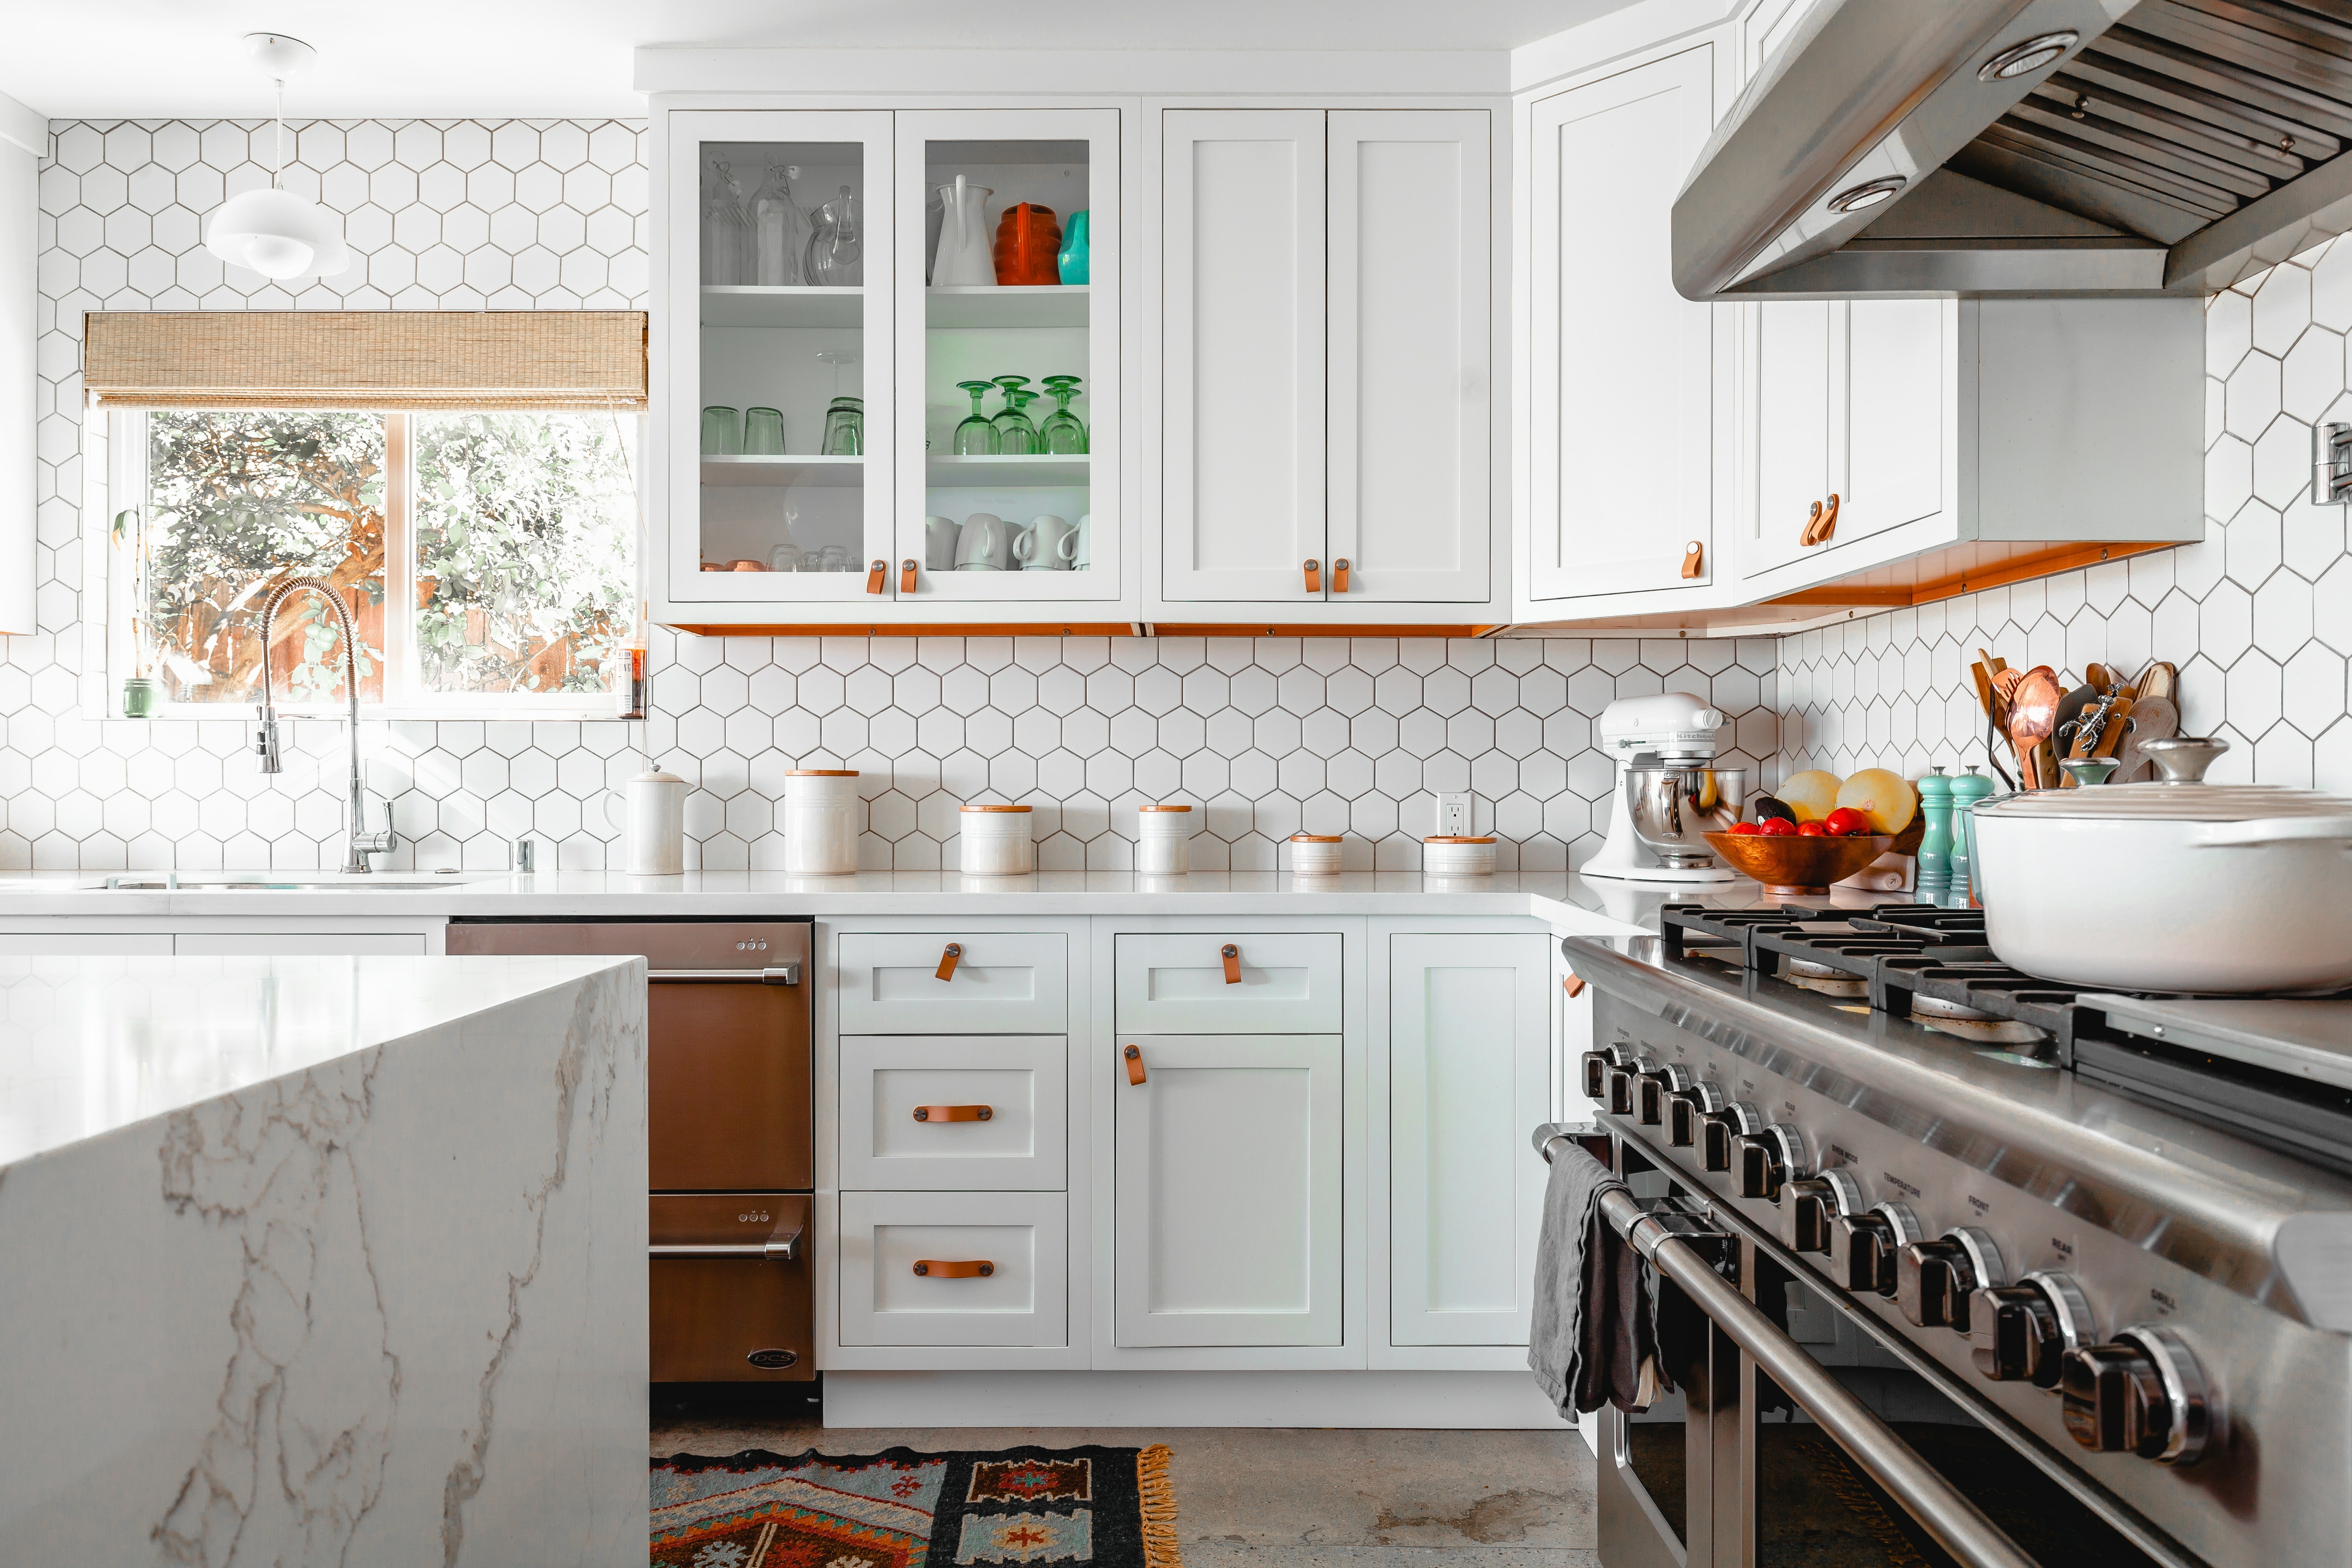 The starting point in designing your dream kitchen